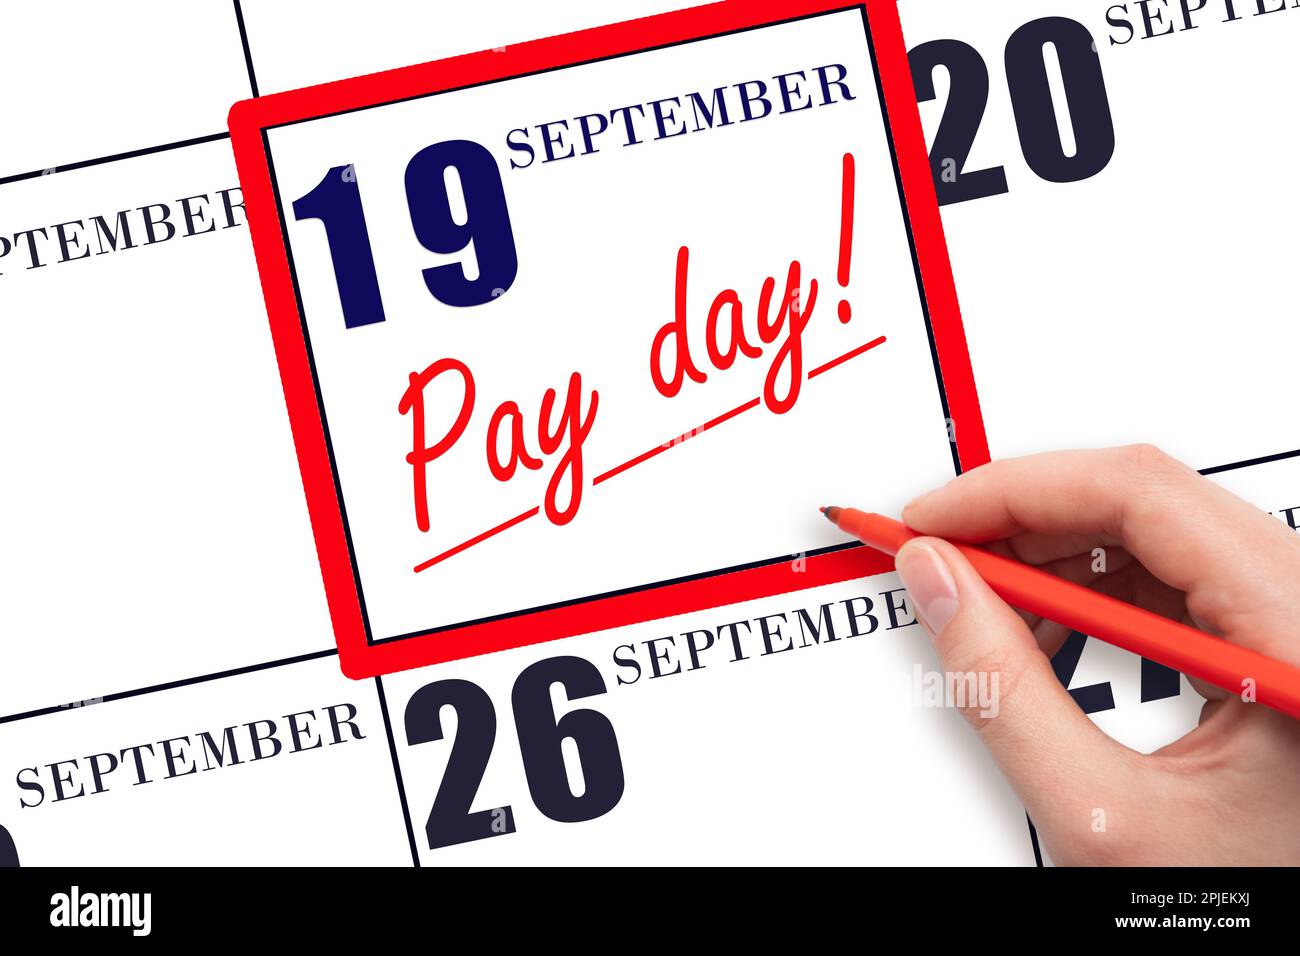 19th day of September. Hand writing text PAY DATE on calendar date September 19 and underline it. Payment due date. Reminder concept of payment. Autum Stock Photo